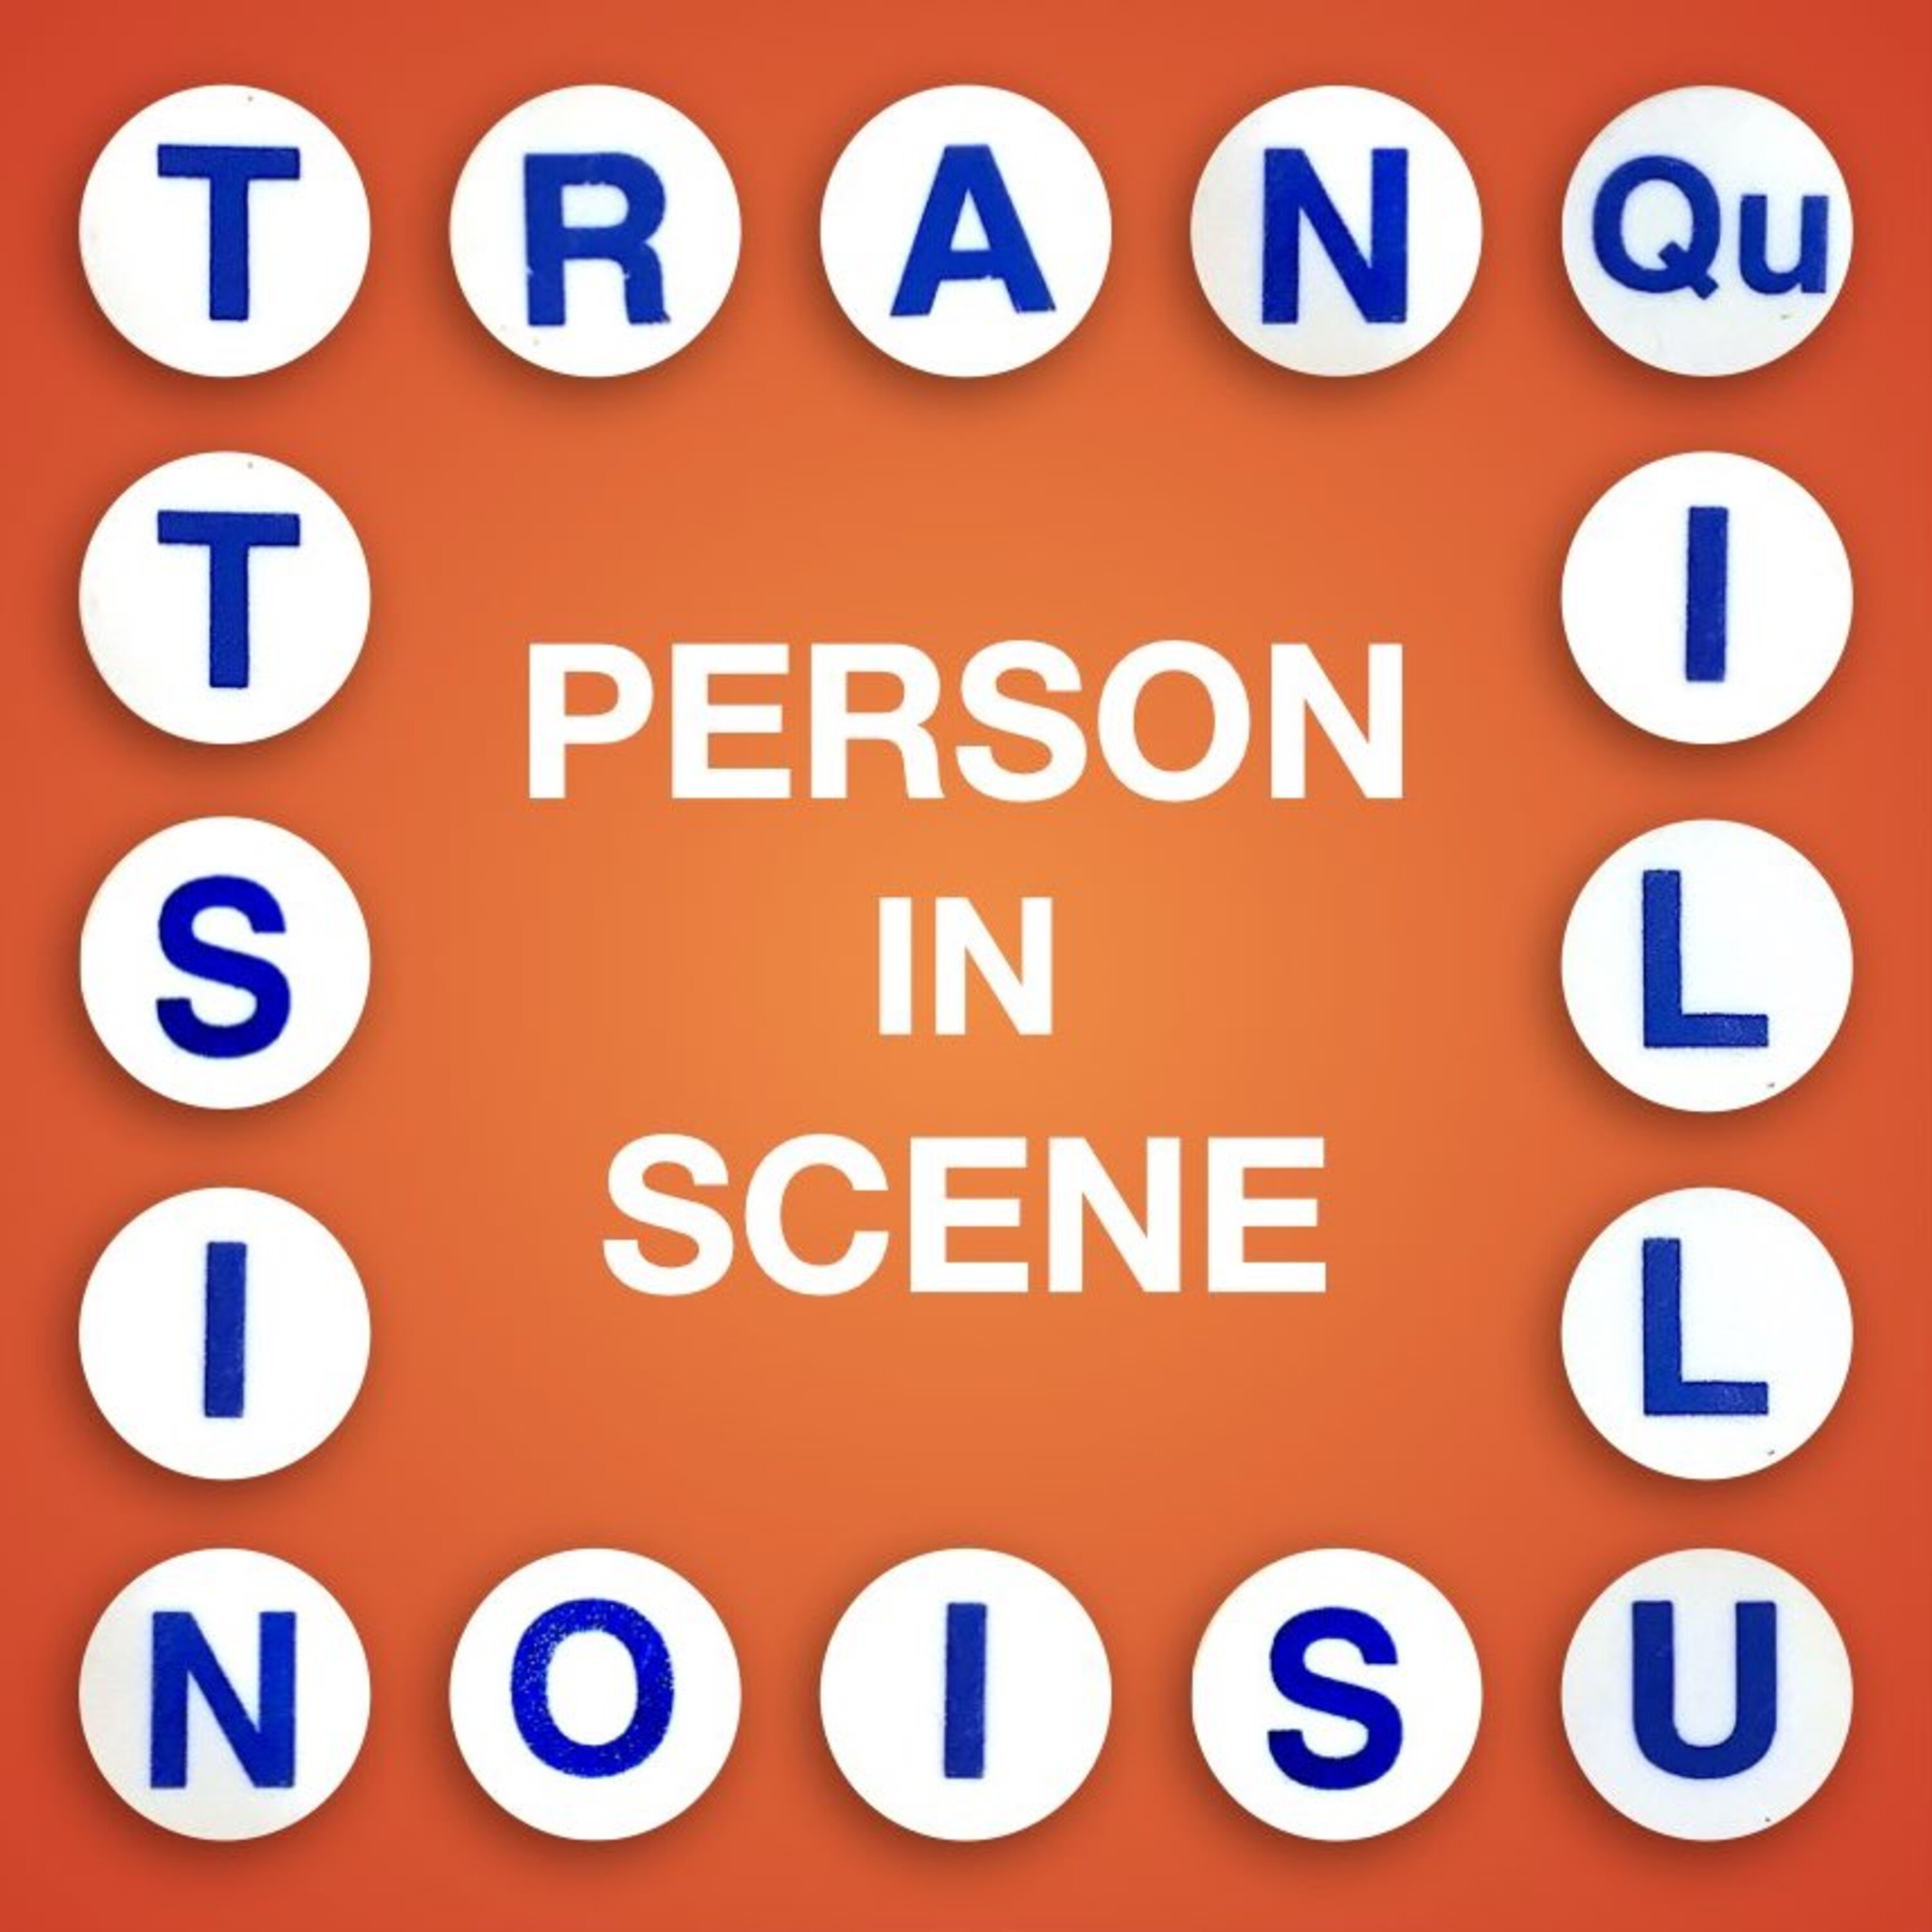 Thumbnail for "Tranquillusionist: Person In Scene".